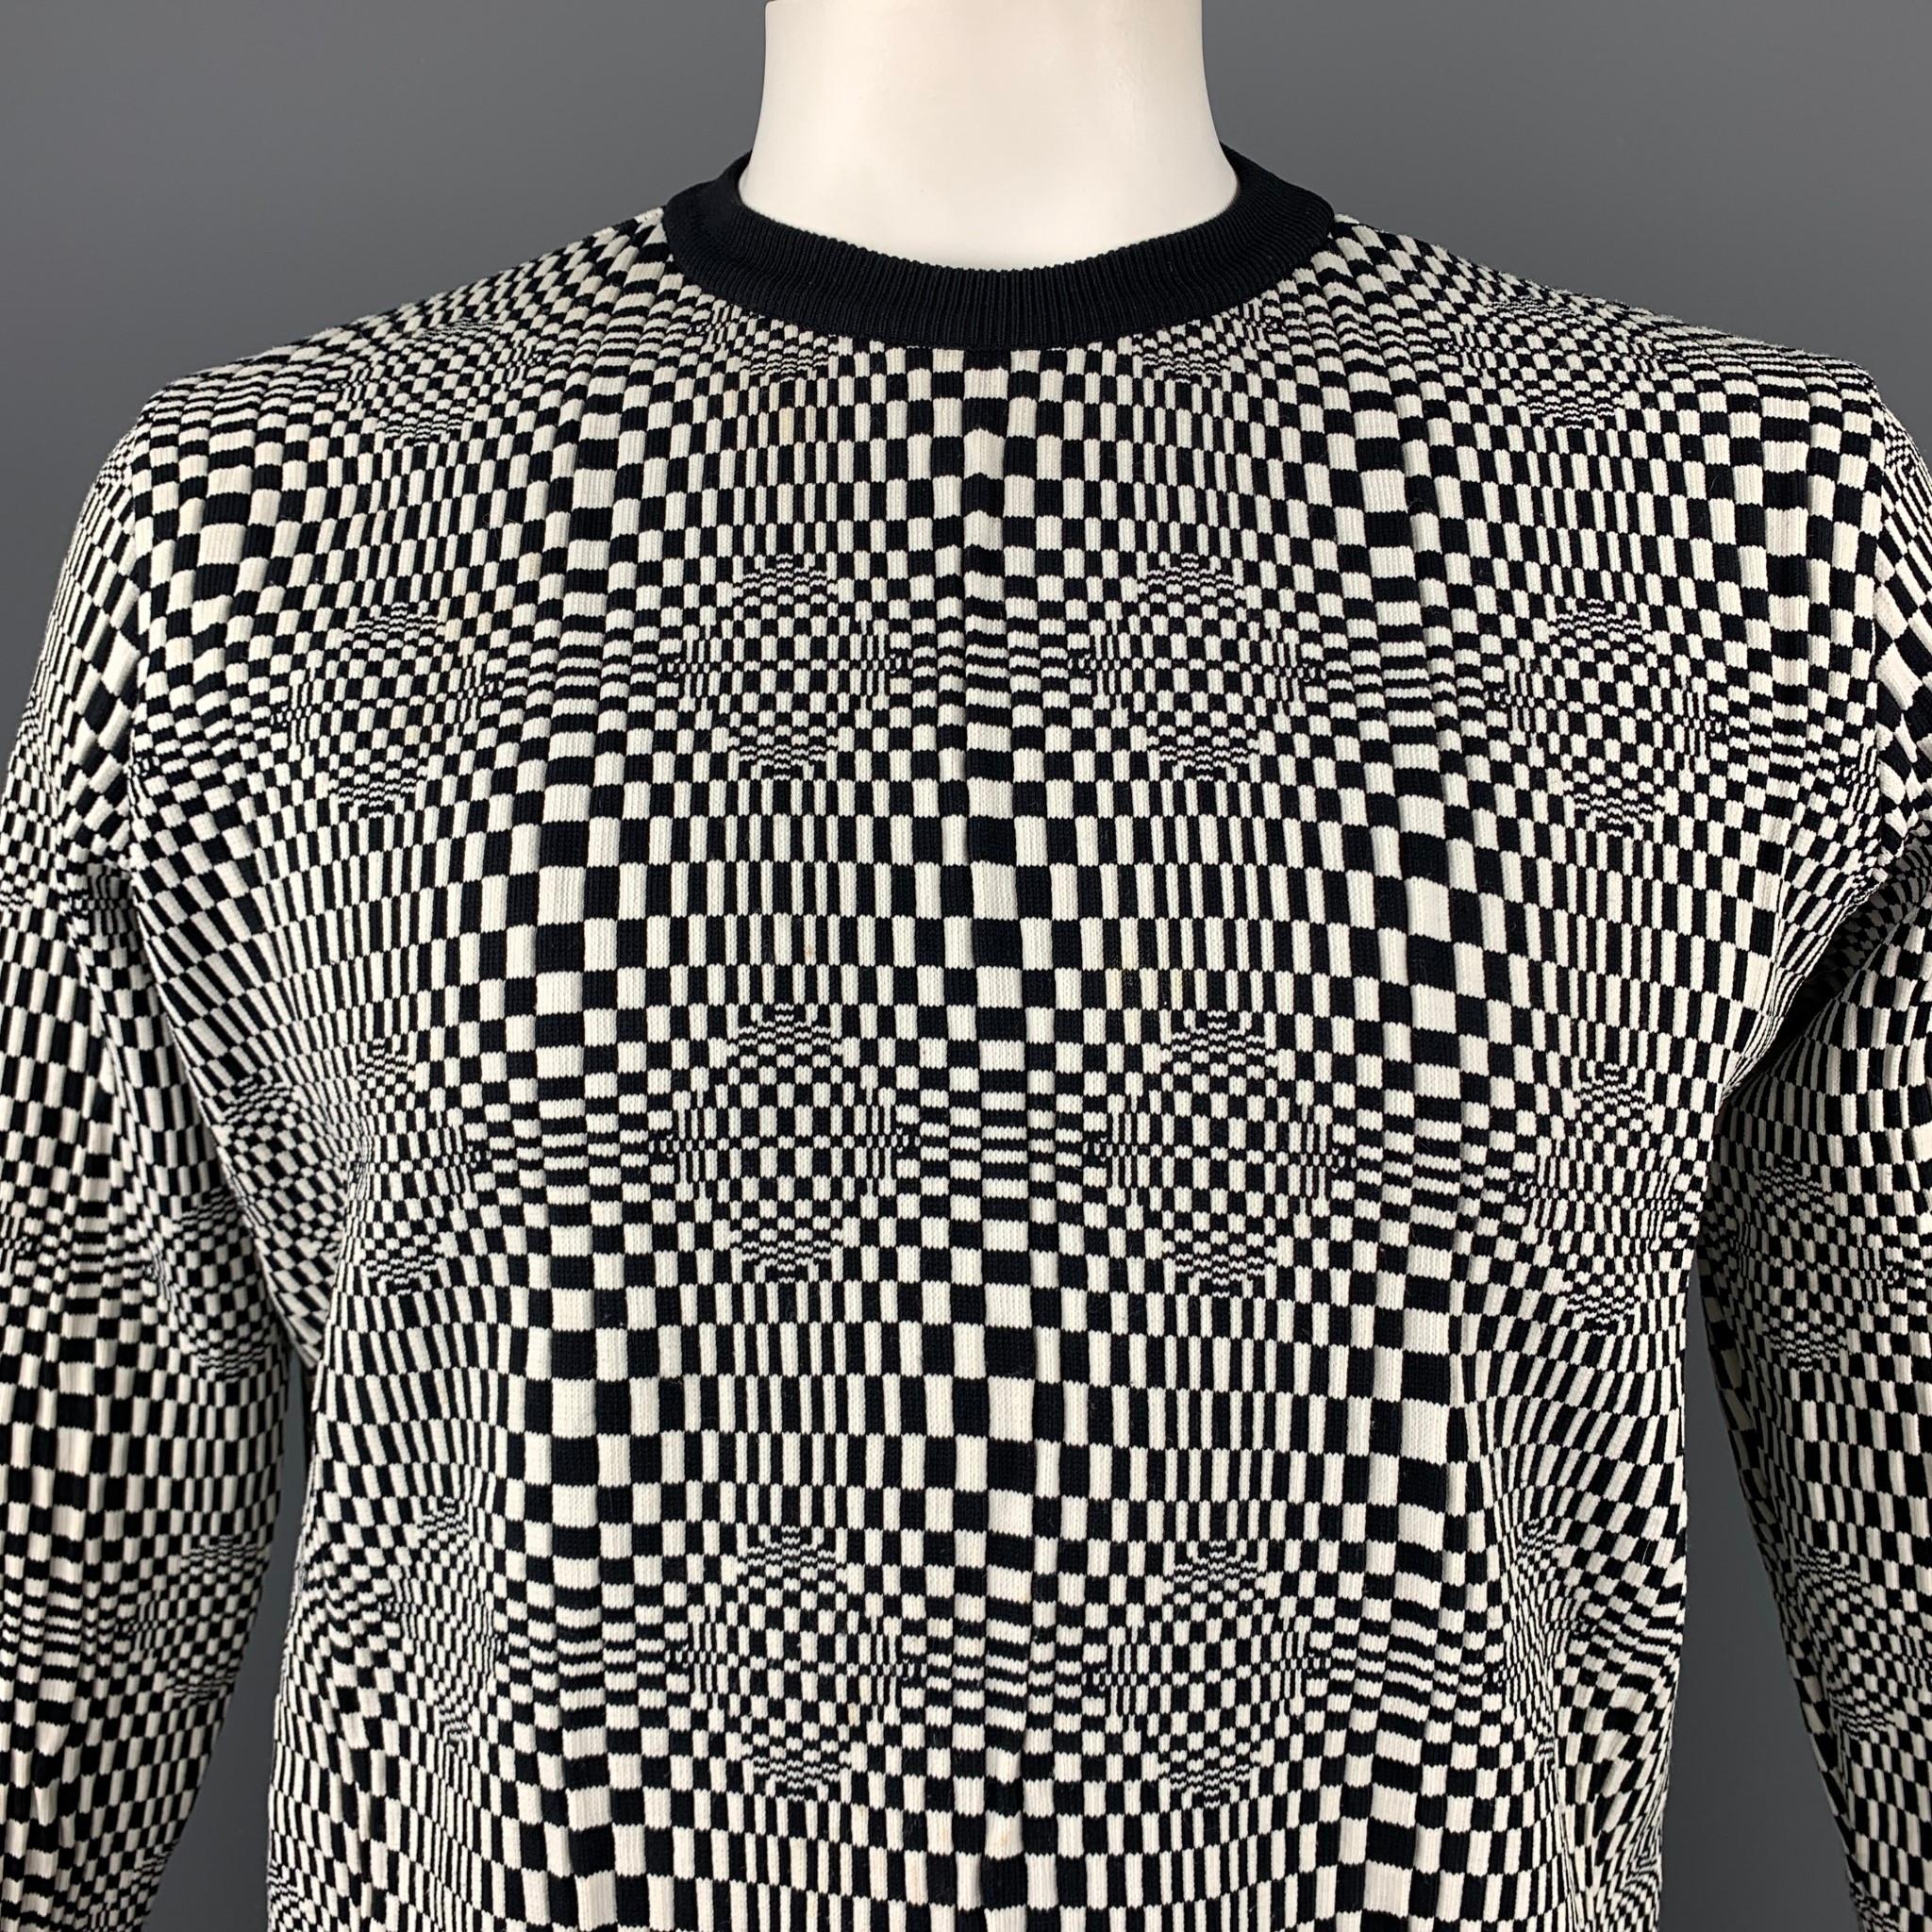 Vintage VERSACE CLASSIC pullover comes in a black & white geometric nylon featuring a ribbed hem and a crew-neck. Minor wear. Made in Italy.

Good Pre-Owned Condition.
Marked: XL

Measurements:

Shoulder: 19 in. 
Chest: 42 in. 
Sleeve: 25 in.